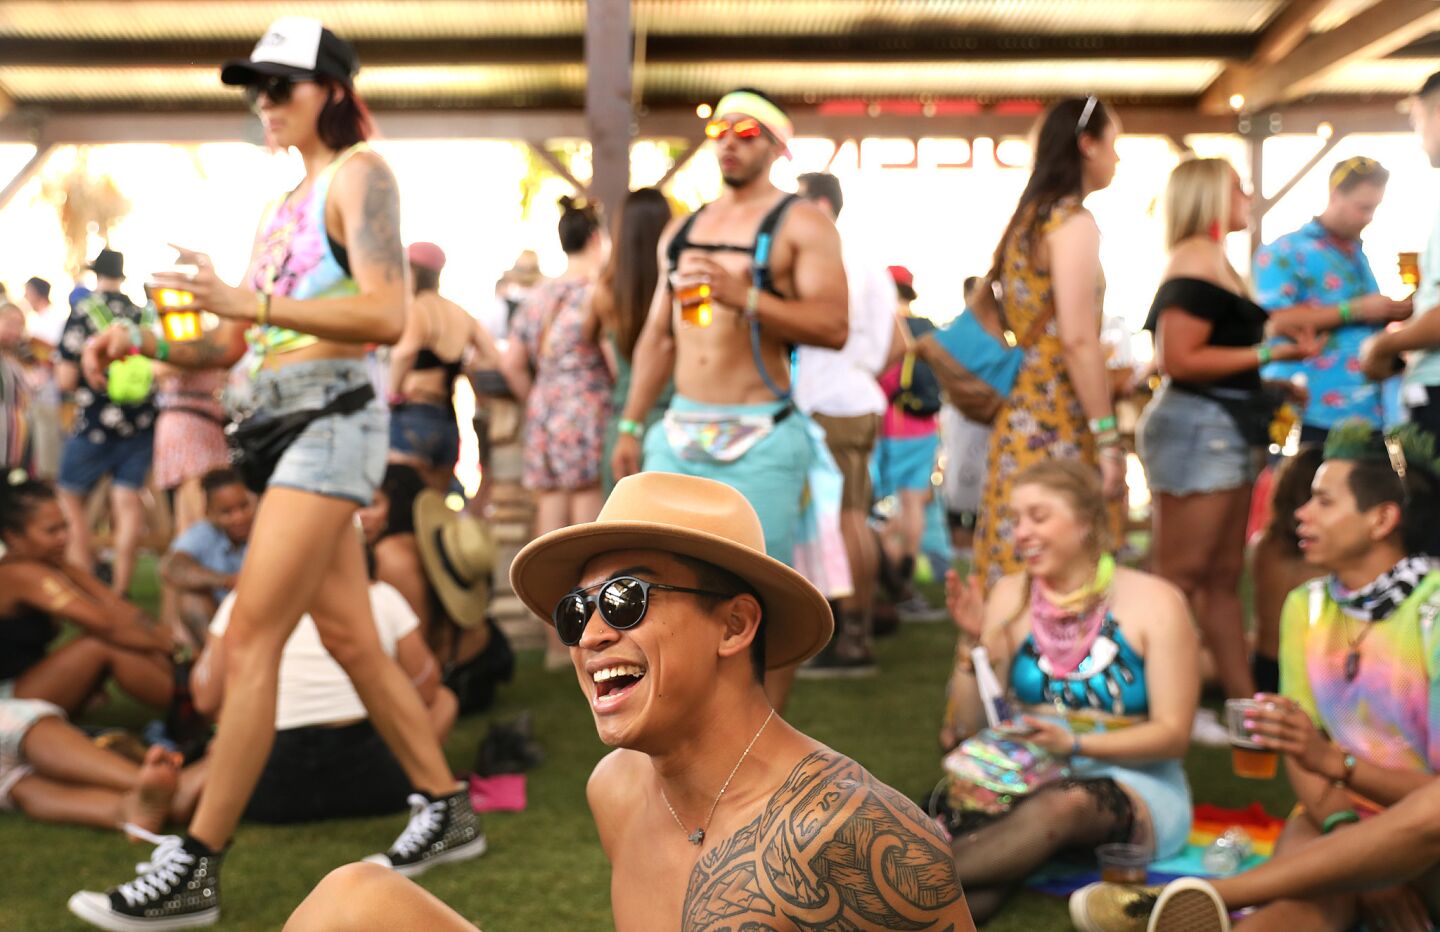 Anthony Tolentino, 23, of Costa Mesa hangs out in the Beer Barn at Coachella.